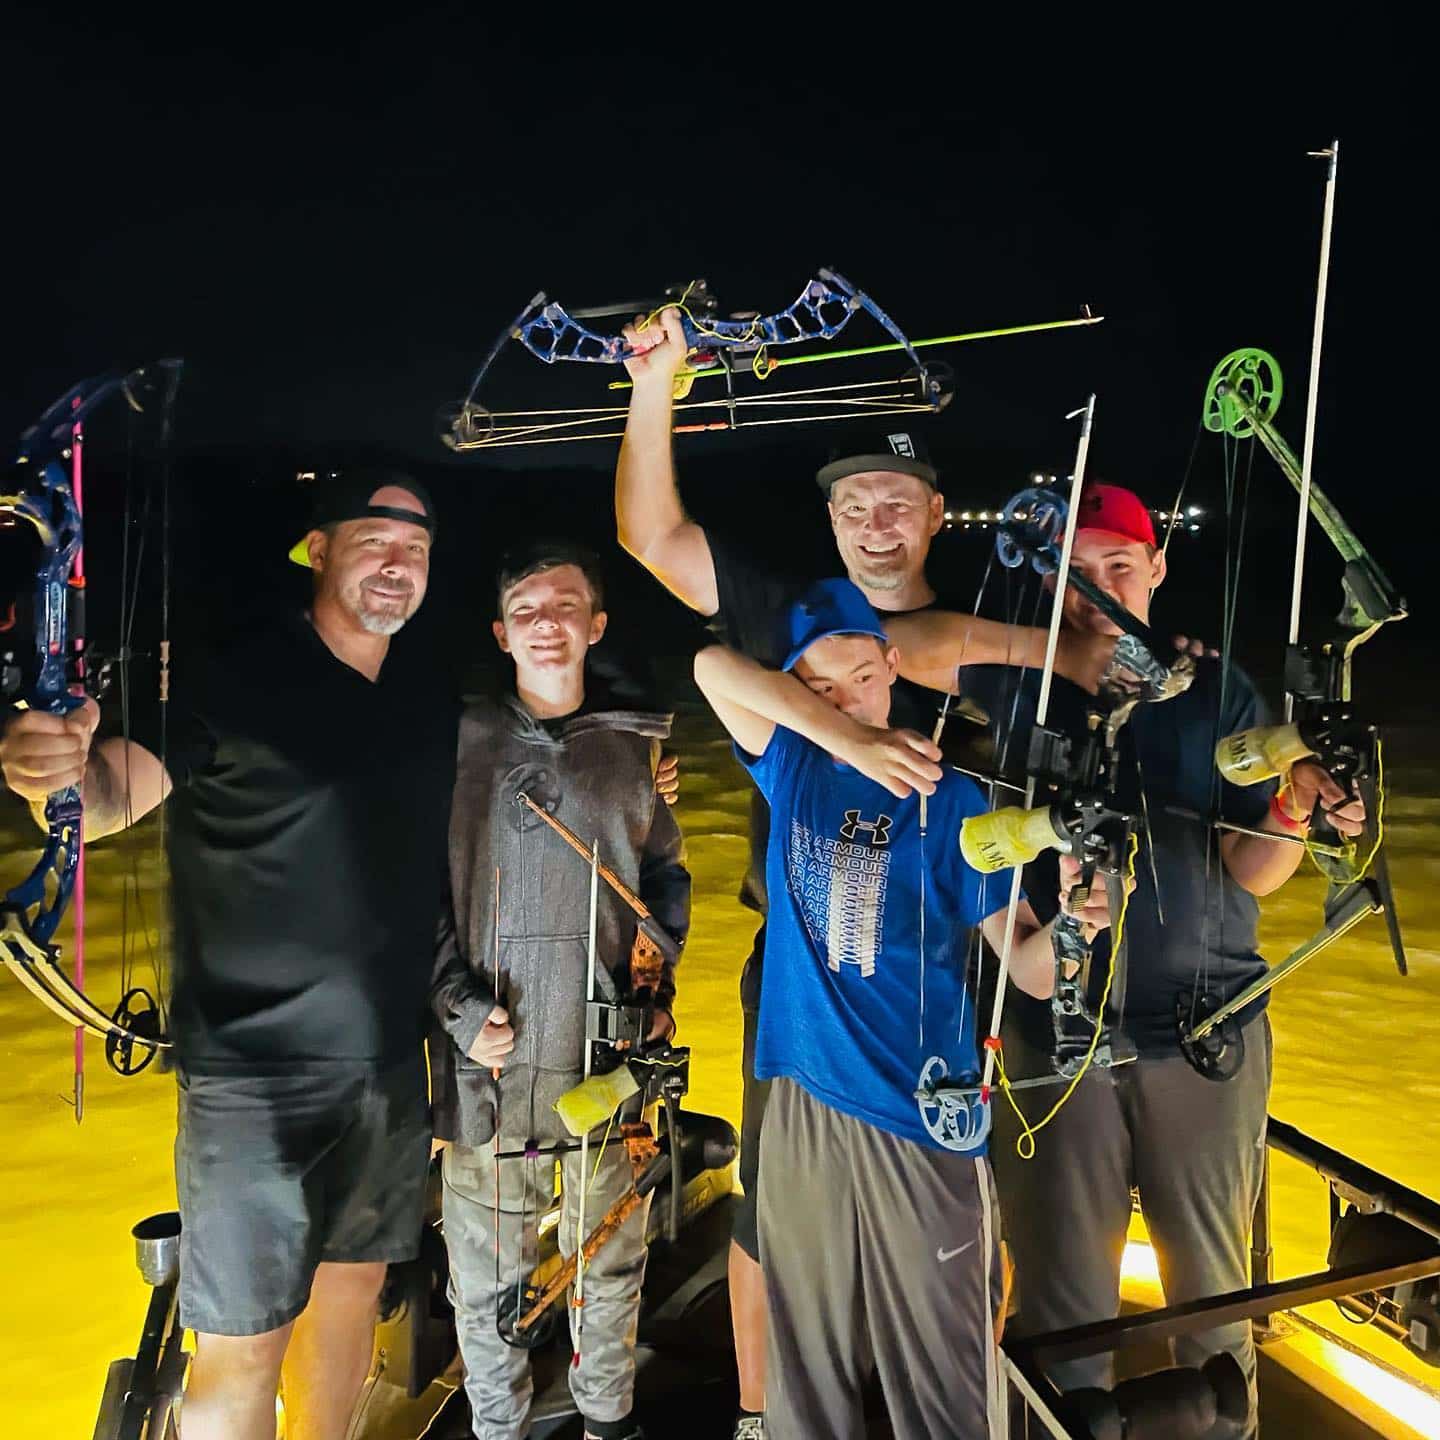 Group Out at Night with Flyin Arrows Bowfishing